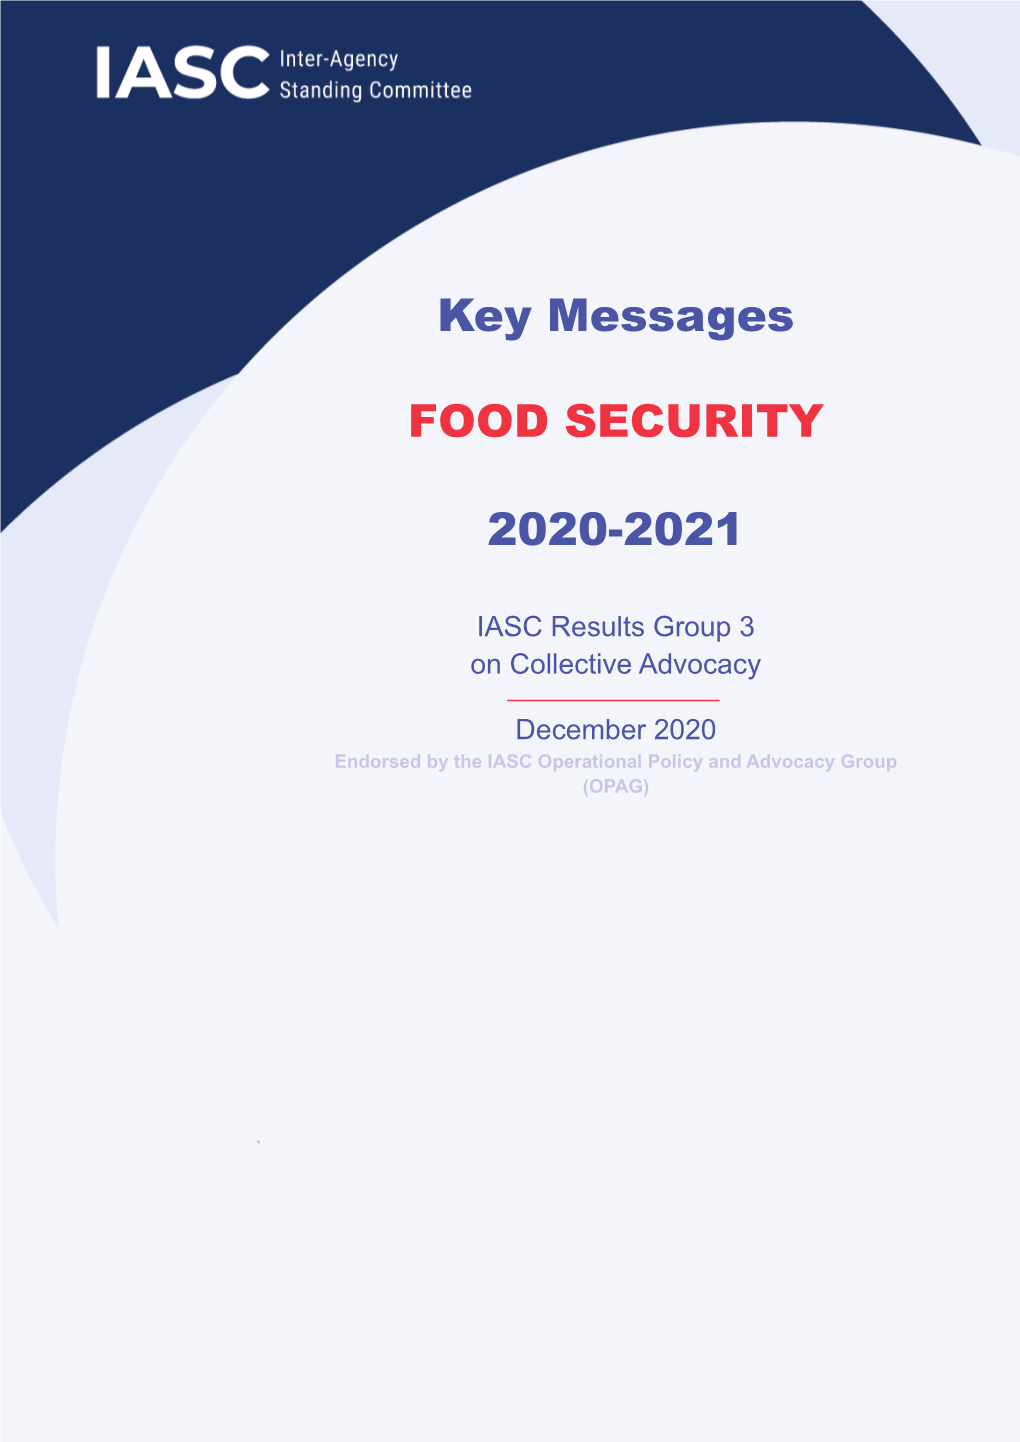 Key Messages FOOD SECURITY 2020-2021